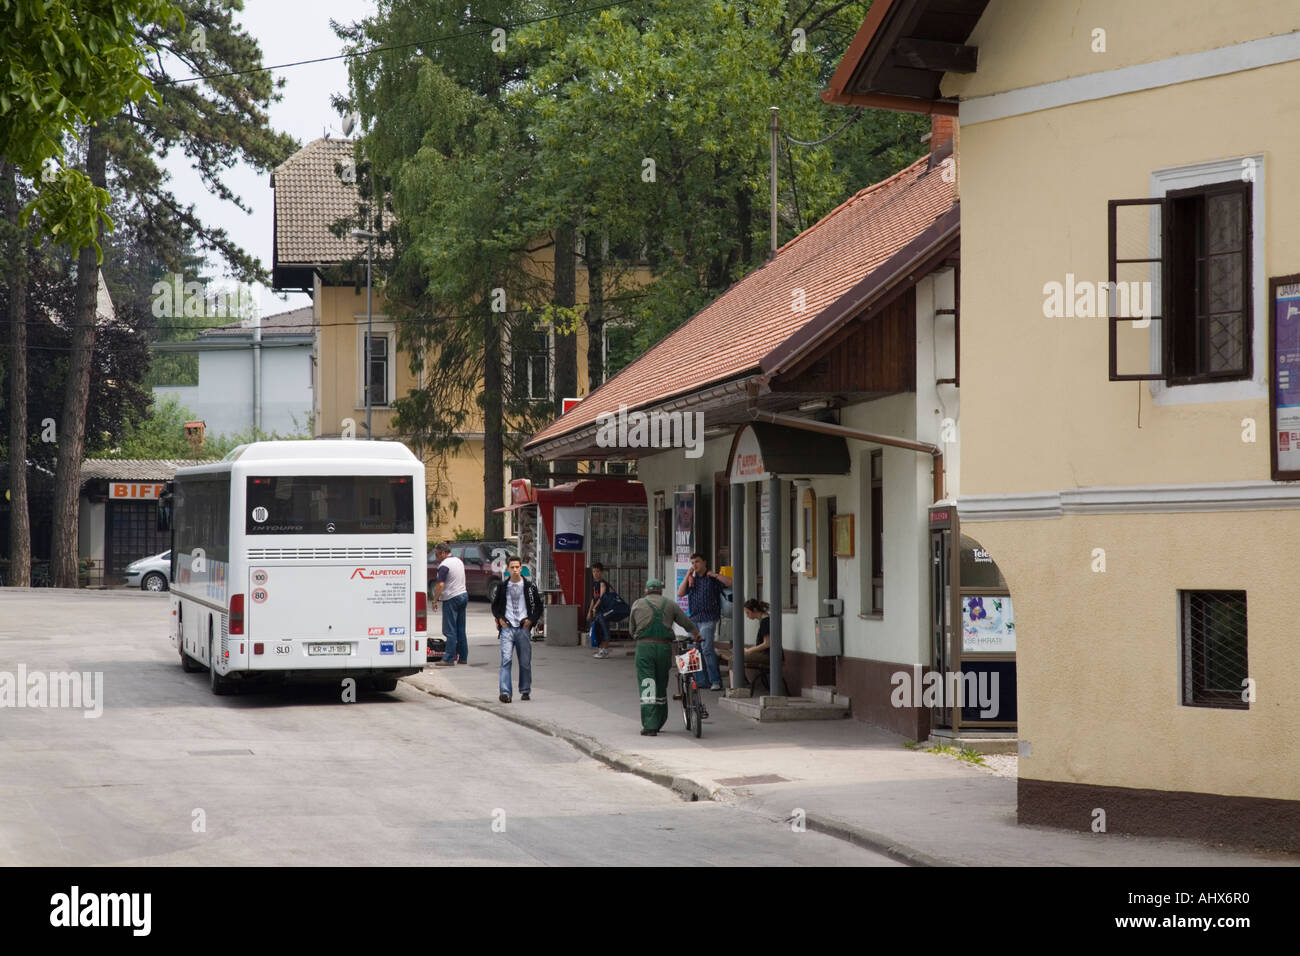 Bled Bus station in summer with single decker bus parked and people waiting  on seats outside Stock Photo - Alamy